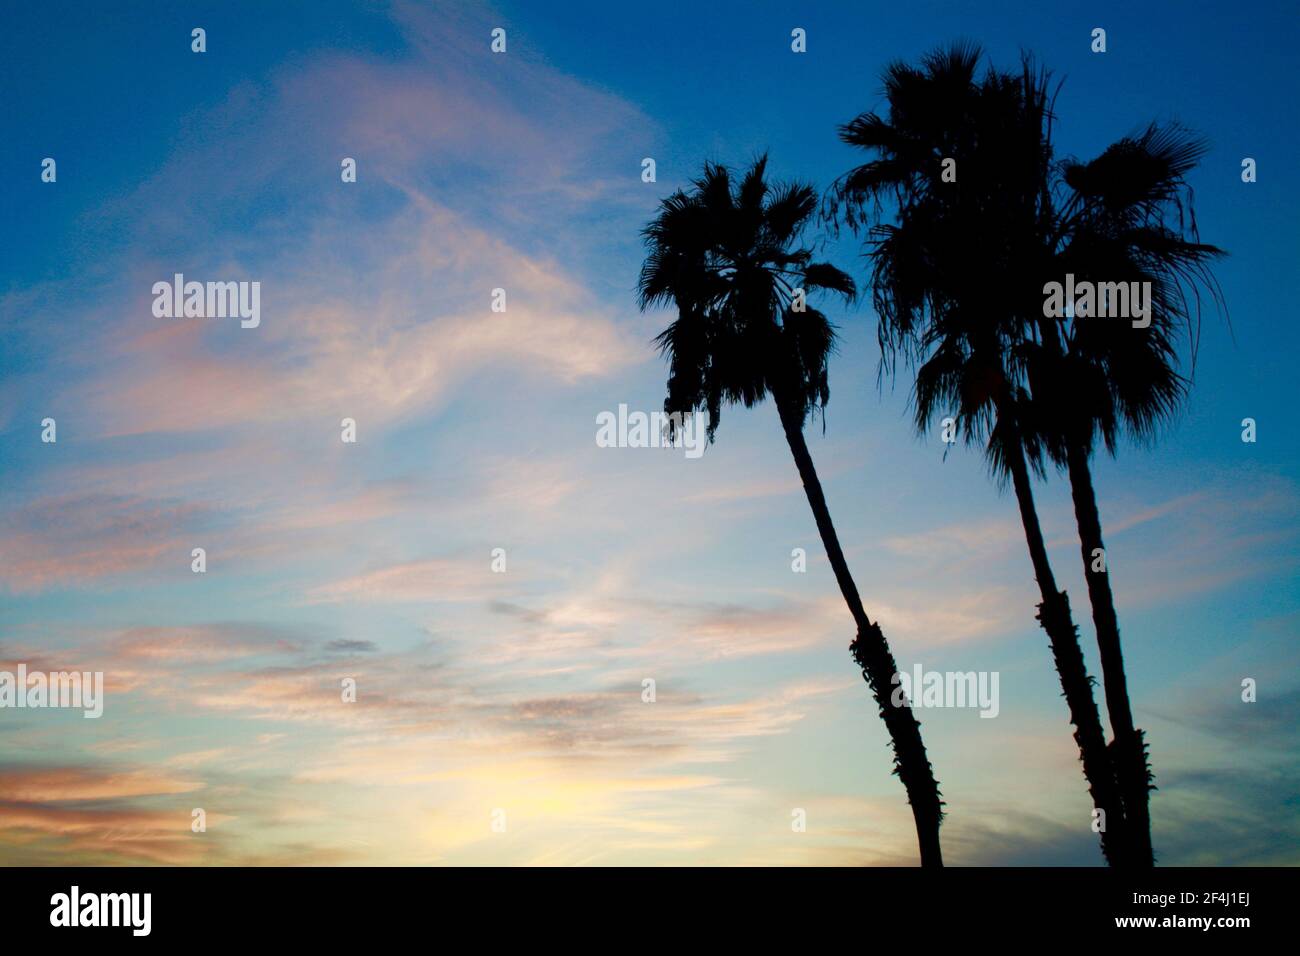 Southern California Palm Trees Silhouetted Against Beautiful Pacific Sunset Colored Sky Stock Photo